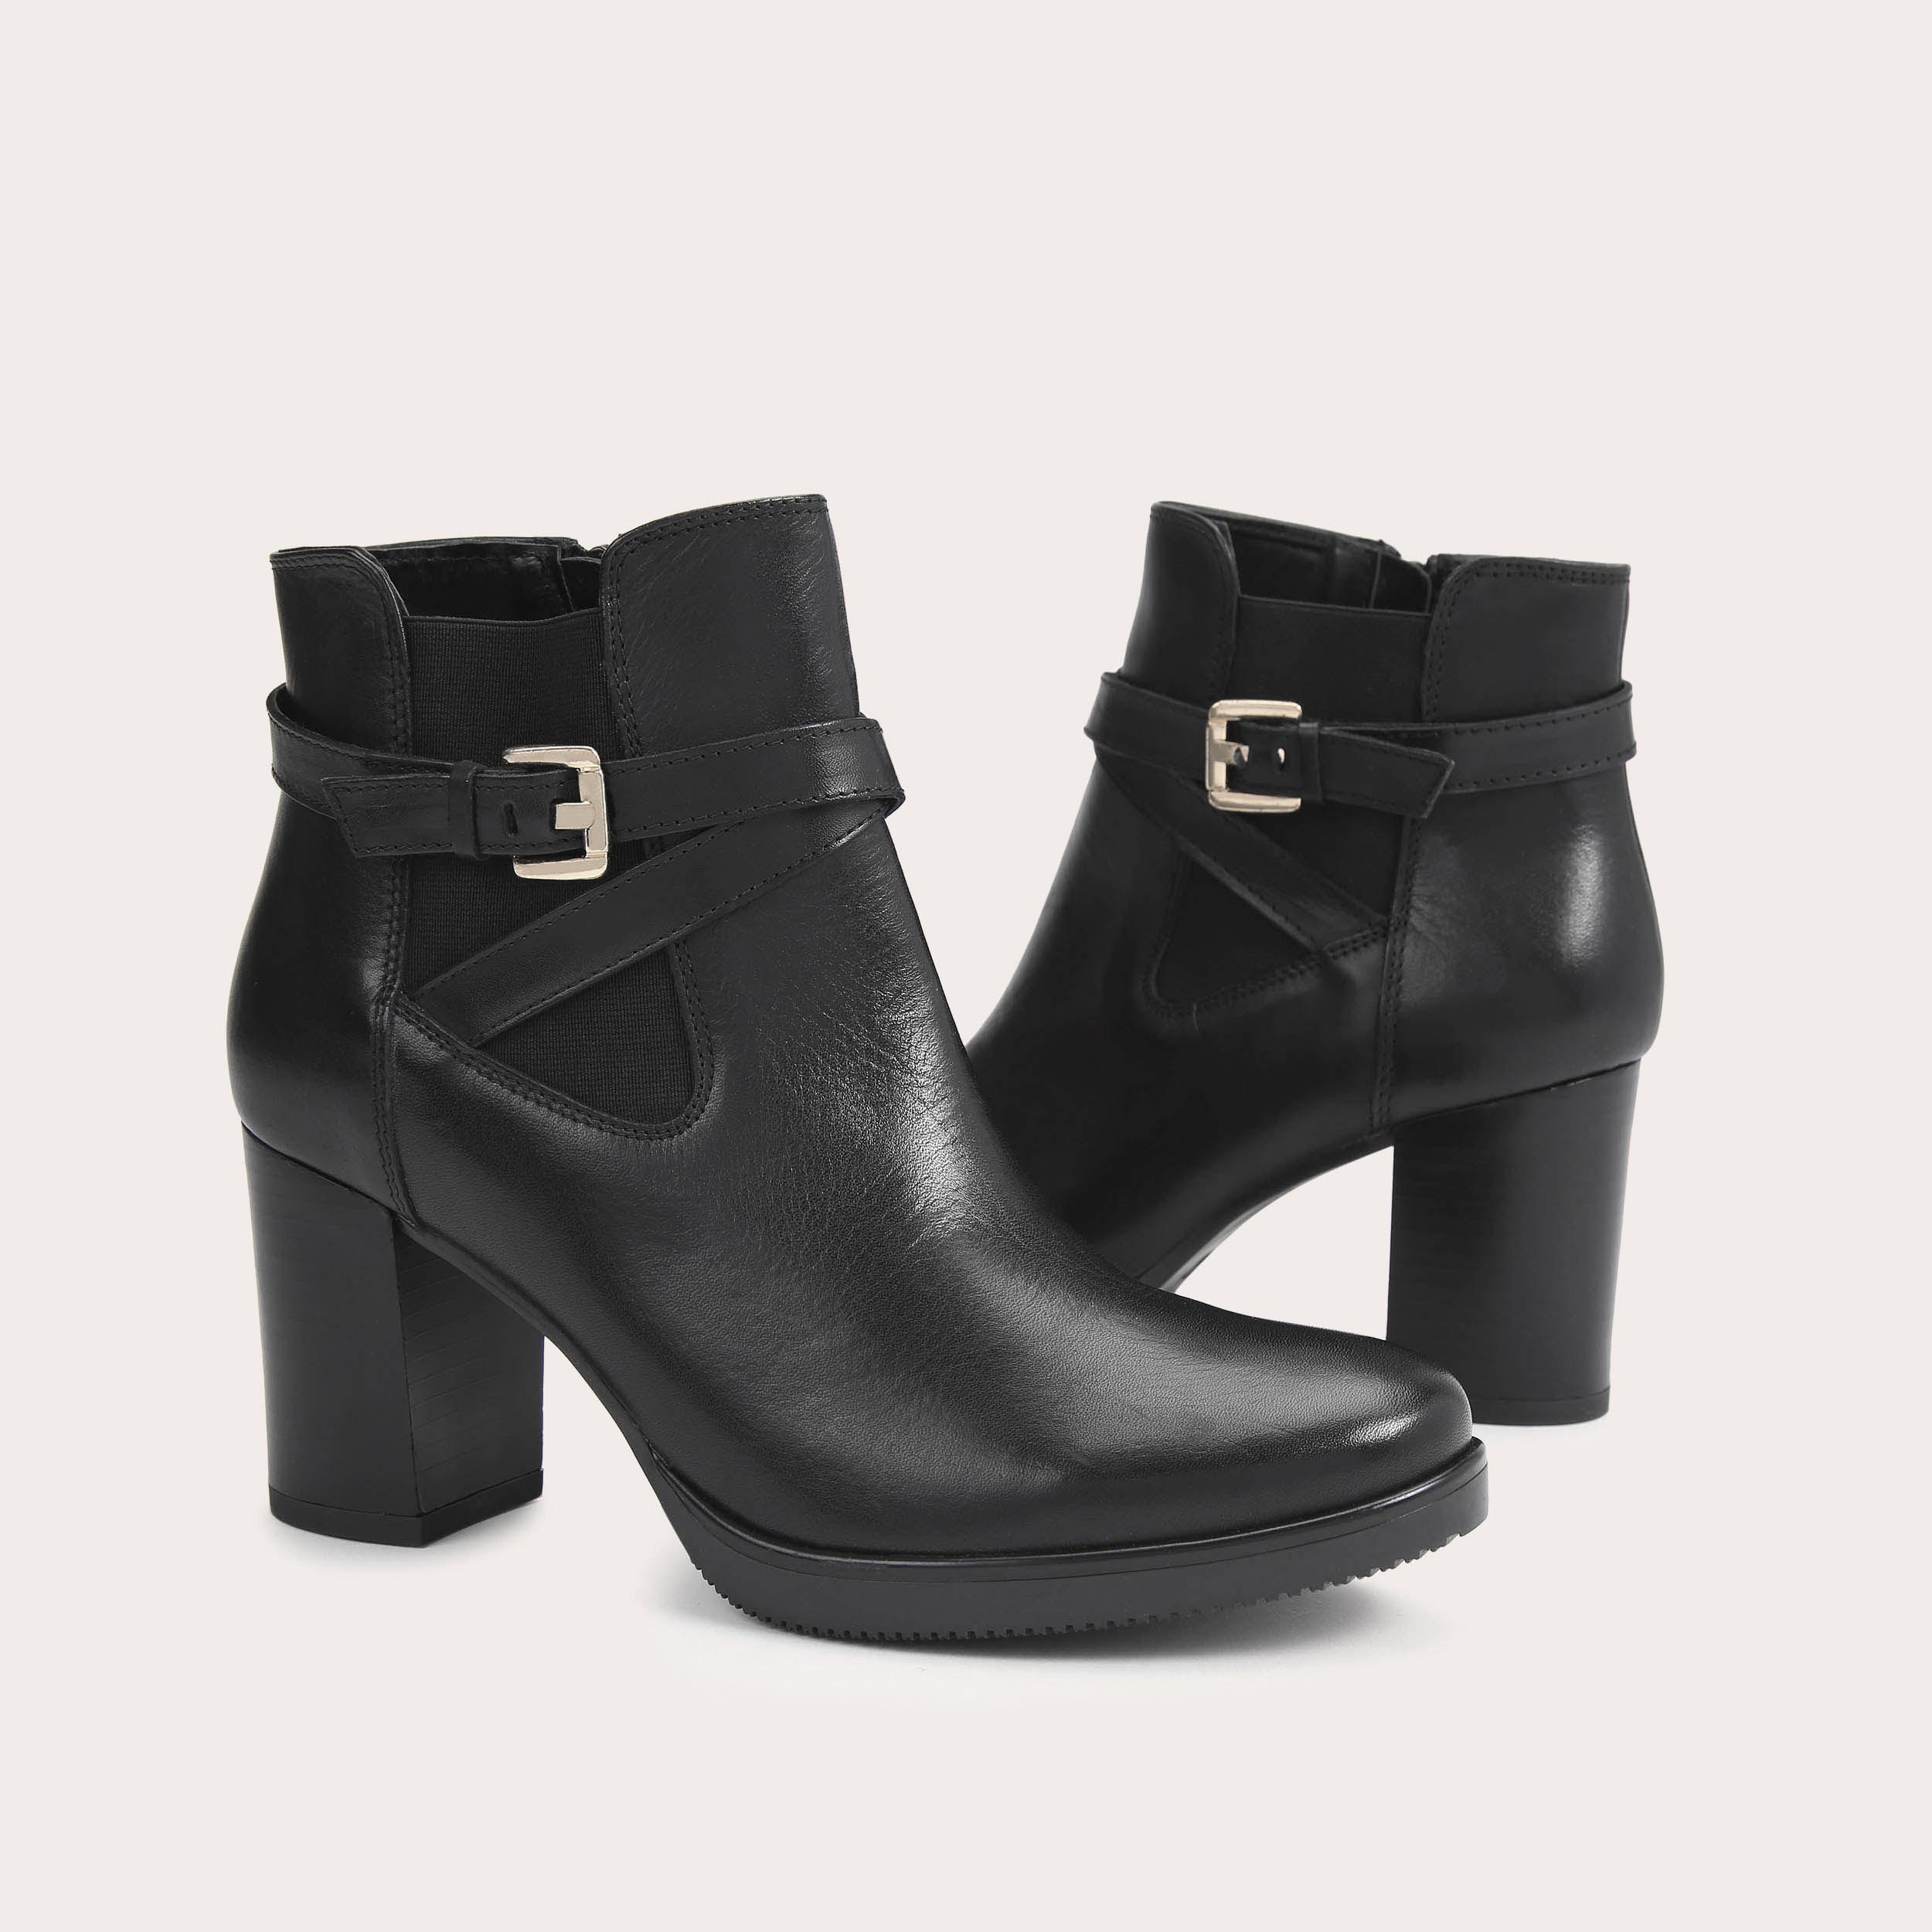 SILVER Black Leather Block Heel Ankle Boots by CARVELA